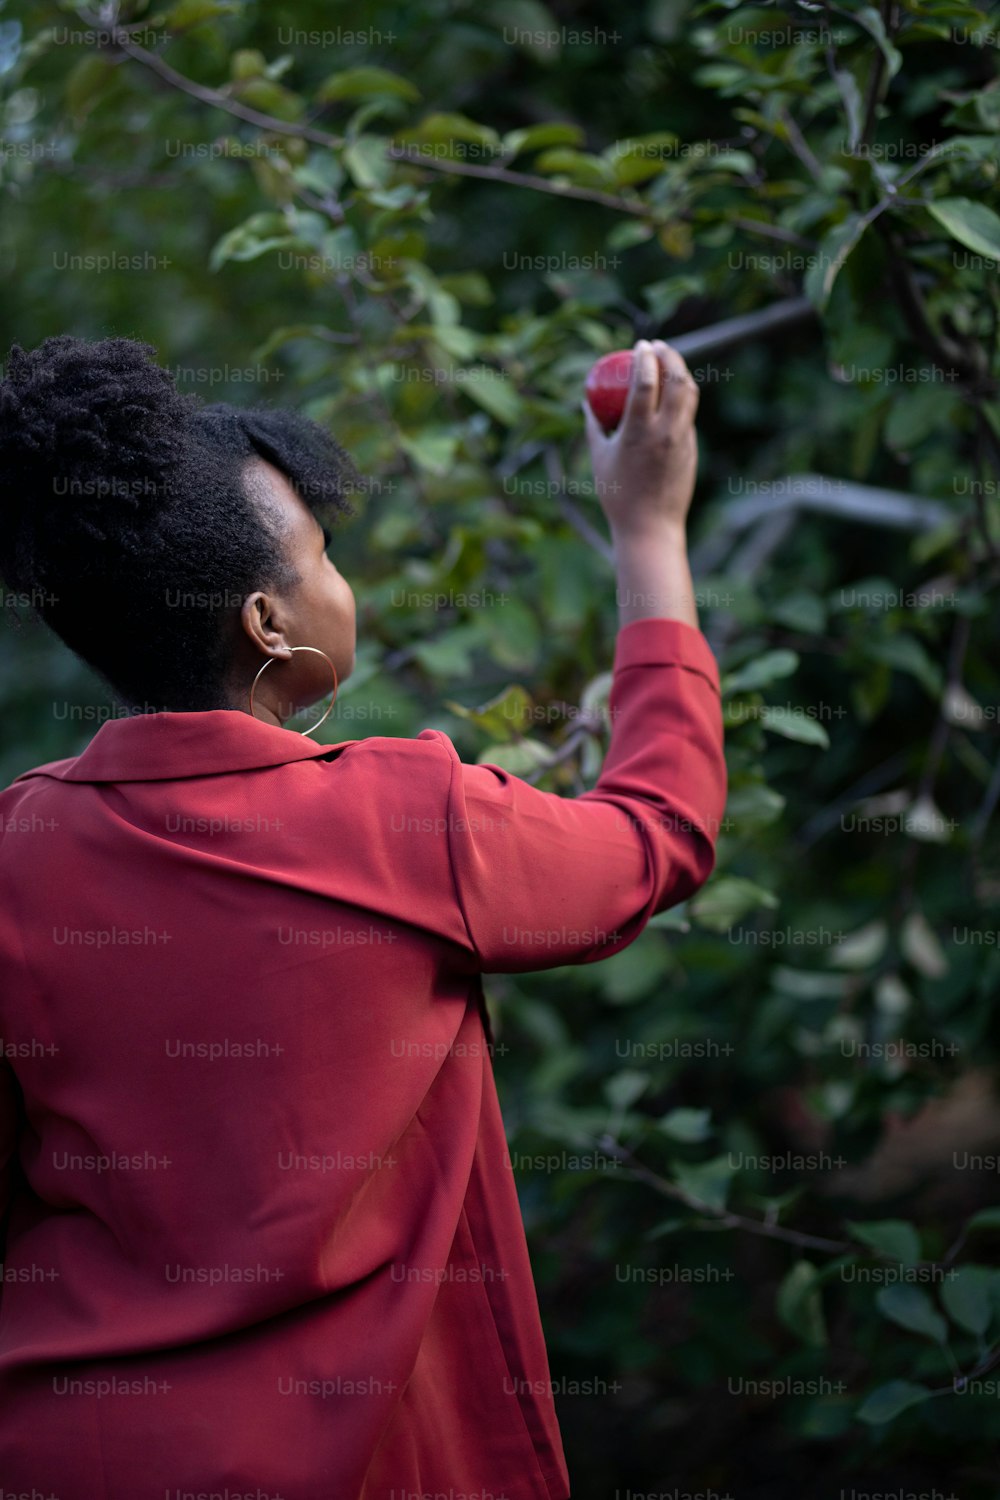 a woman in a red jacket picking an apple from a tree